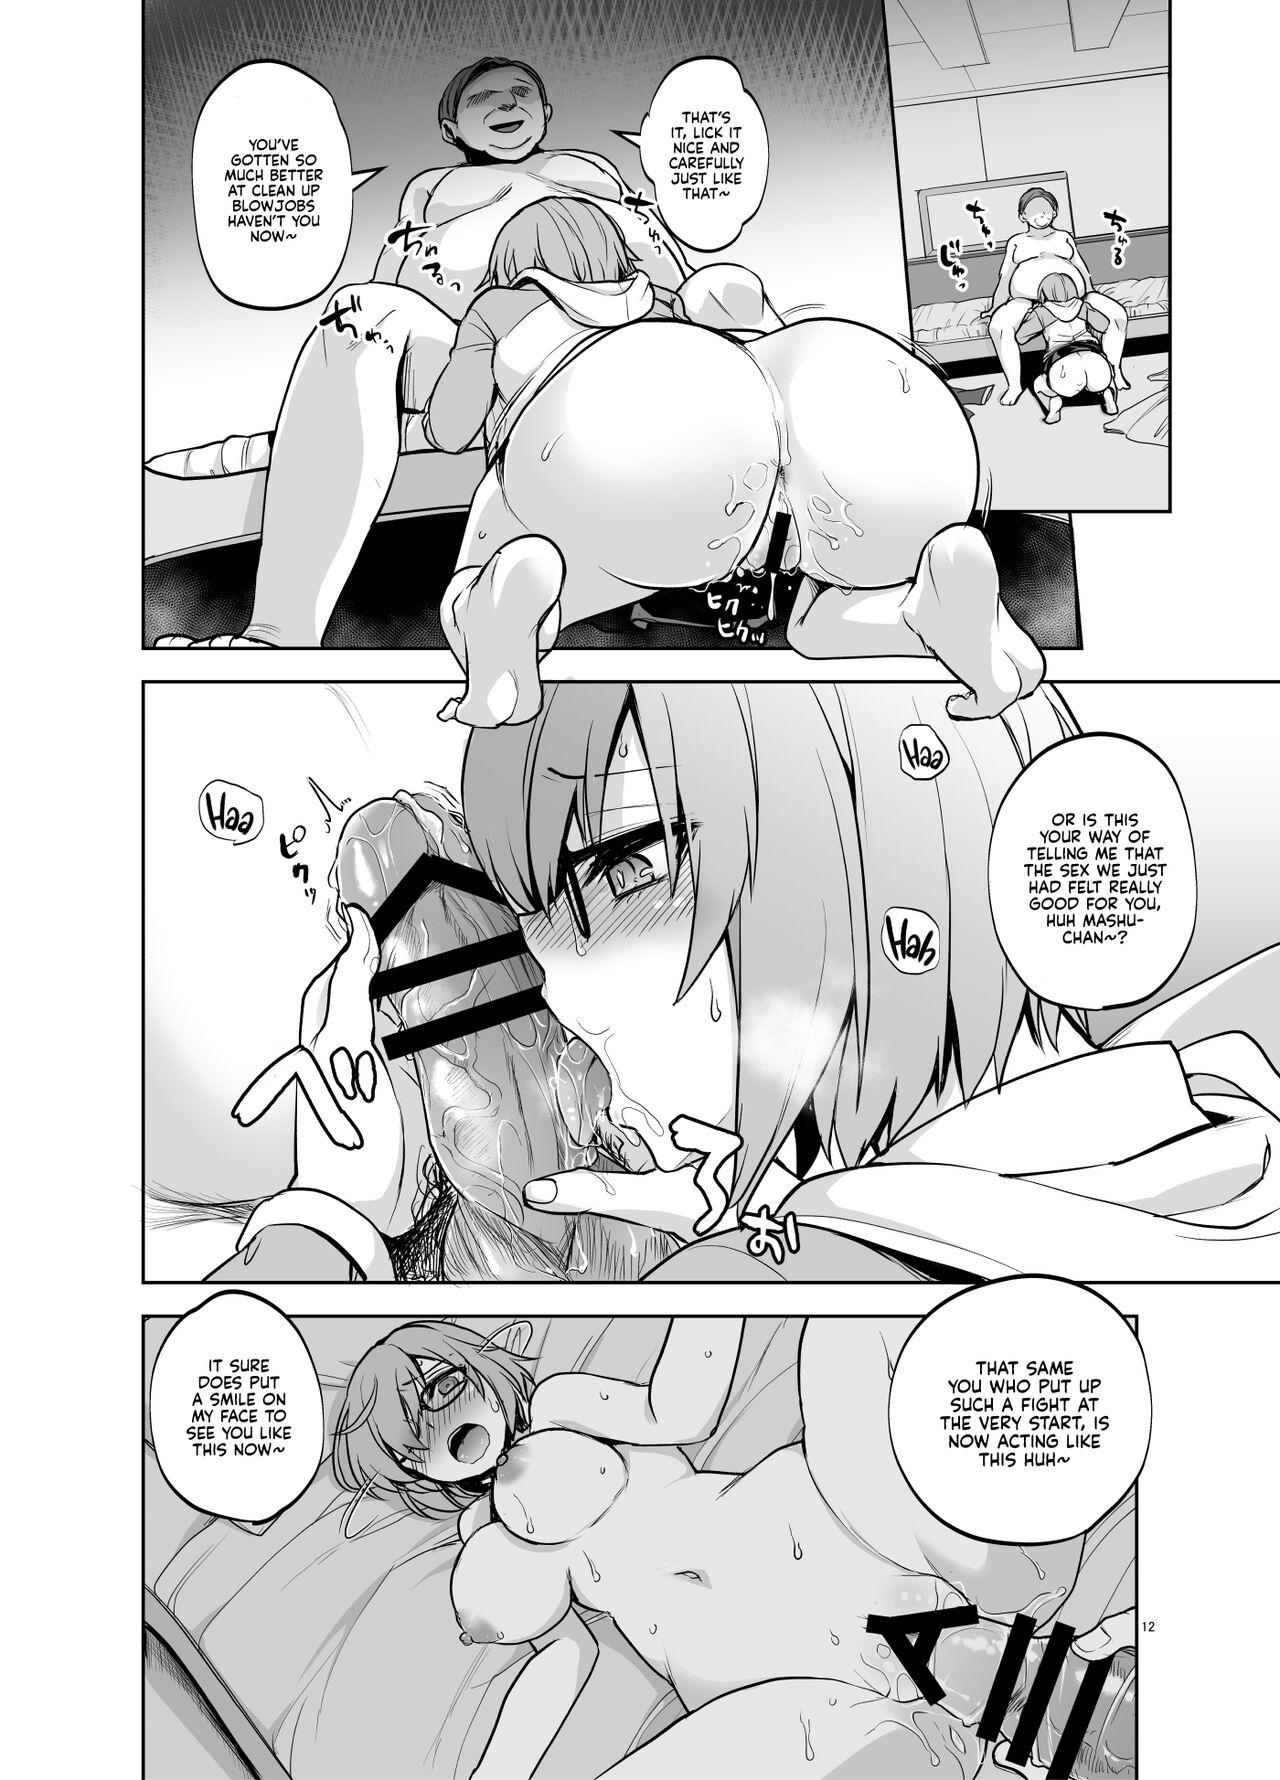 Maledom Mashu Must Deal with this Pushy n' Lusty Oji-san Whenever Senpai is Busy Rayshifting! - Fate grand order Fudendo - Page 11